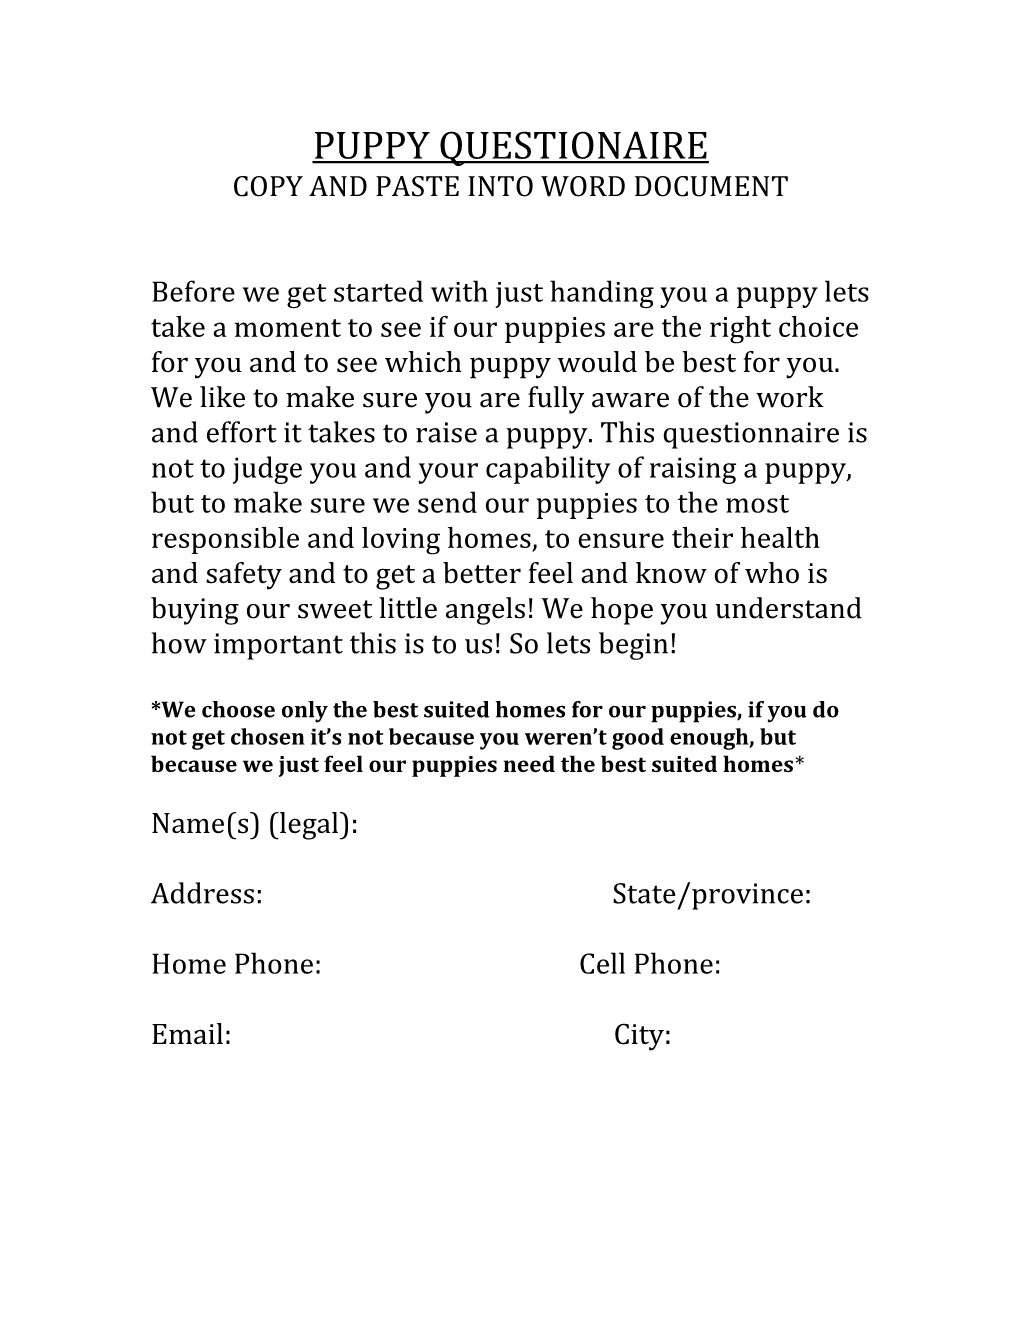 Copy and Paste Into Word Document